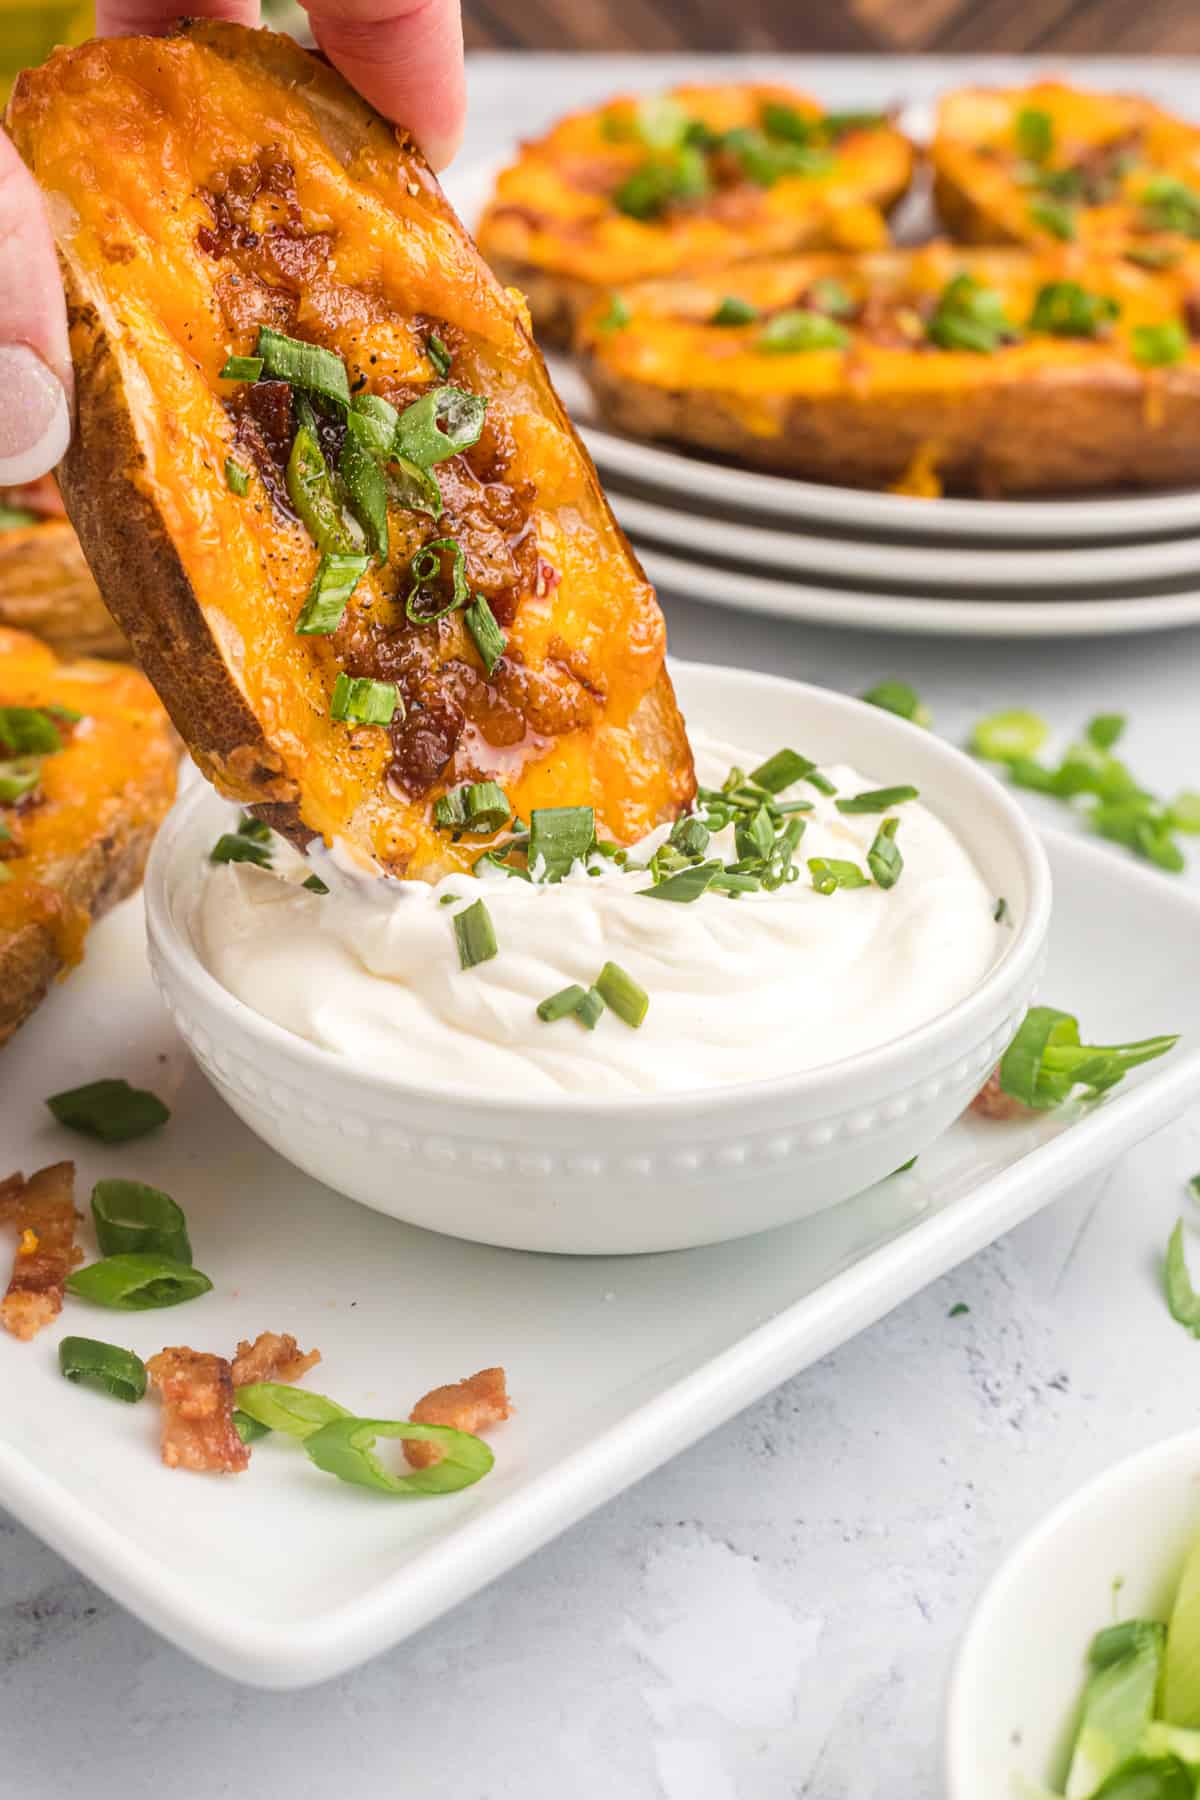 A loaded potato skin is being dipped into a bowl of sour cream.